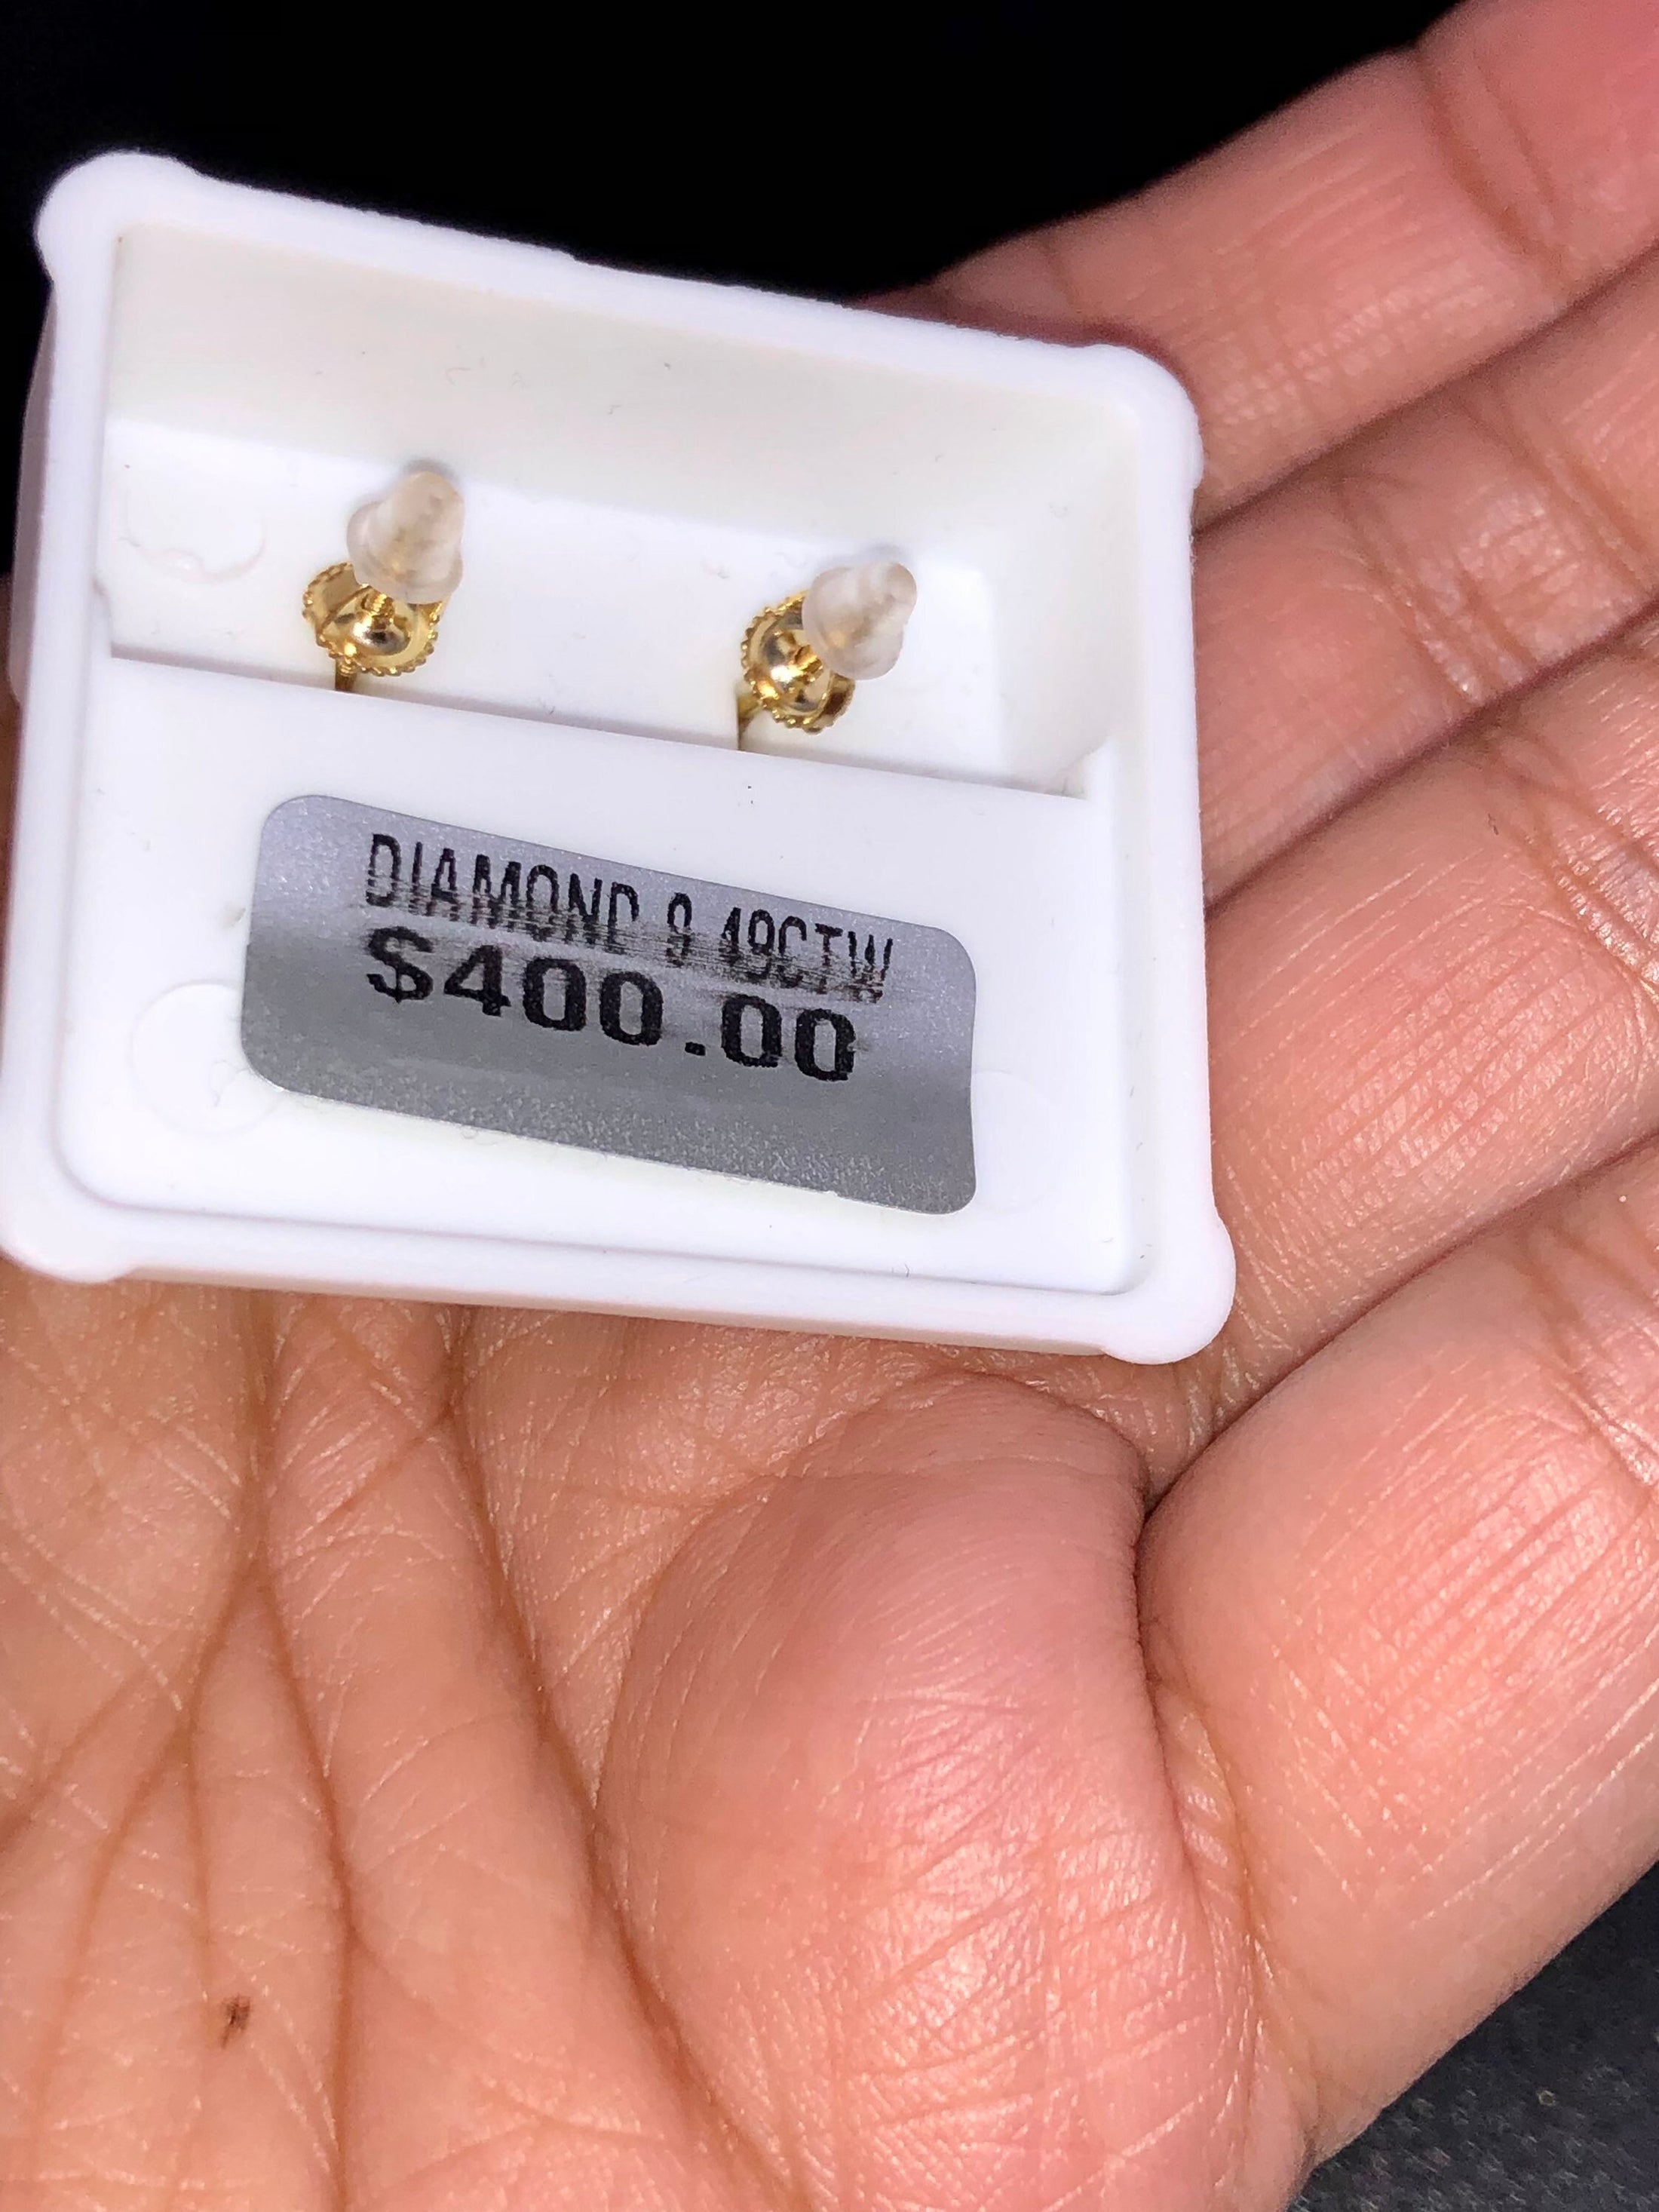 Real diamond nugget earrings 1/2 cttw natural diamonds not CZ not moissanite! Comes w certificate of authenticity free gift packaging Sale!